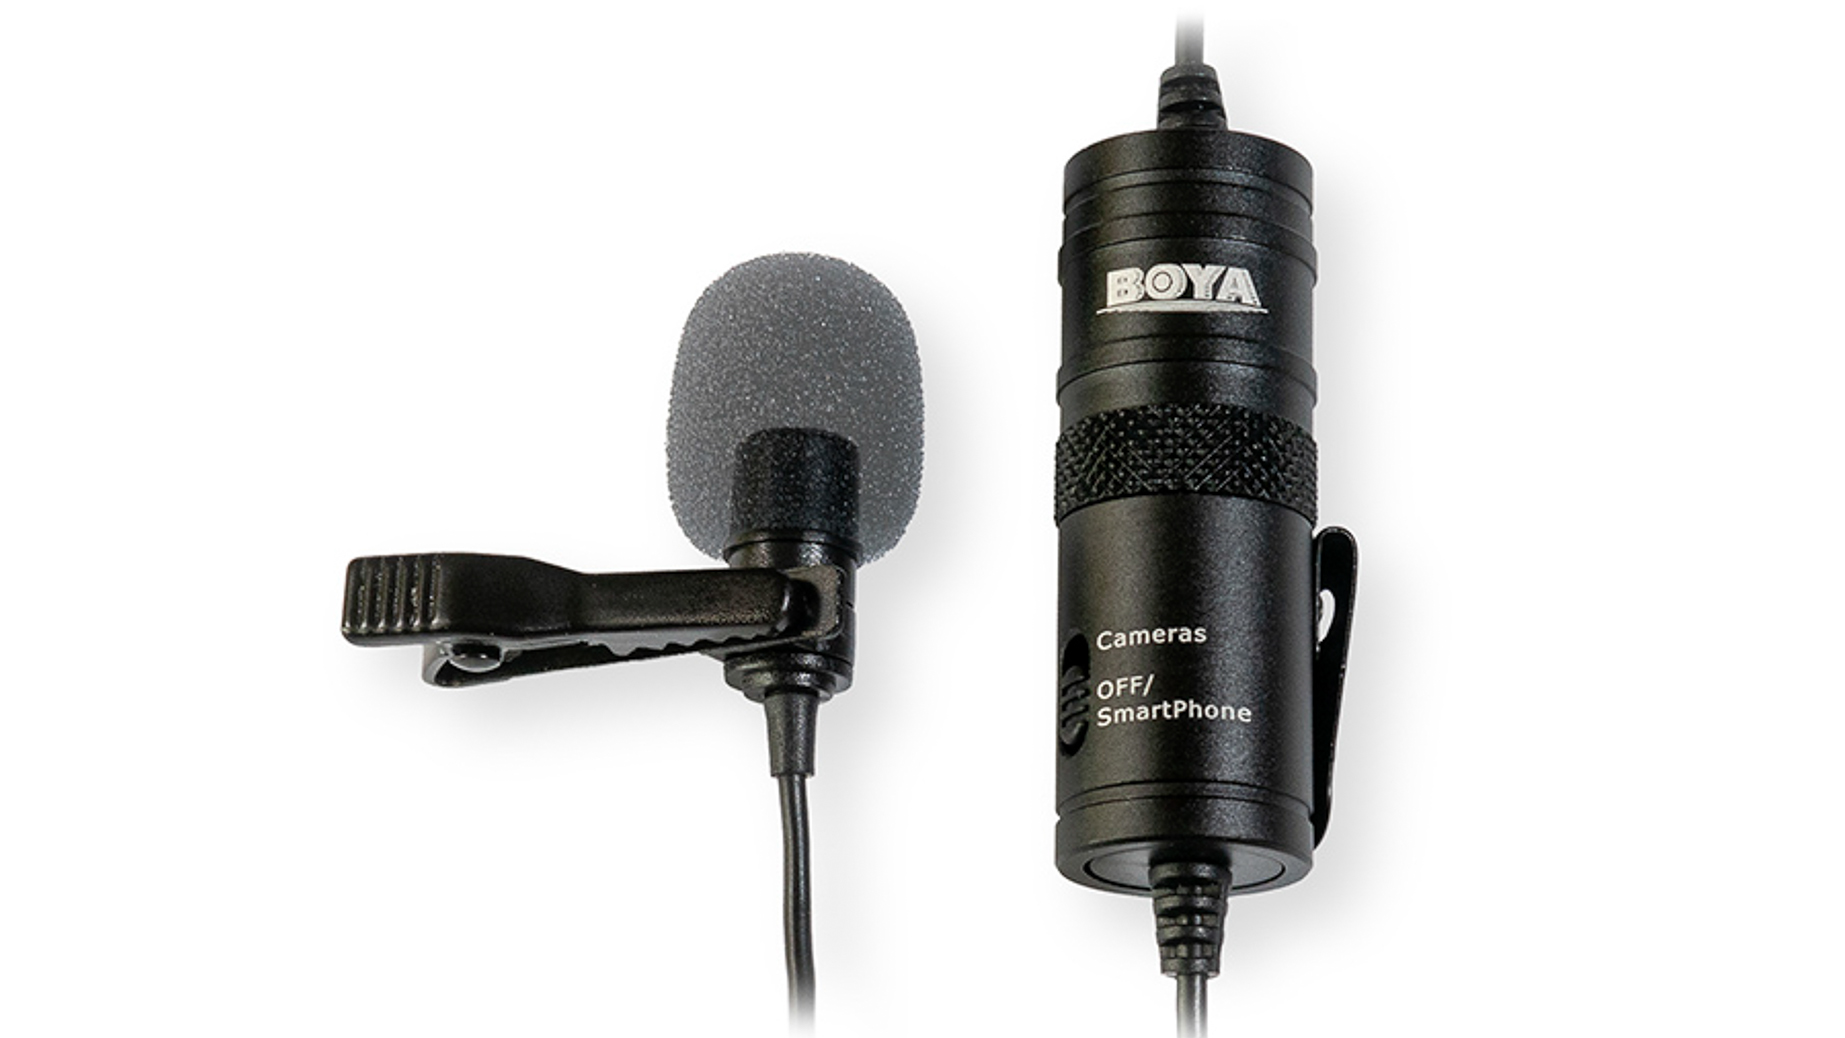 A black wireless lavalier microphone with a foam windscreen and a clip, designed for use with cameras and smartphones for vlogging.